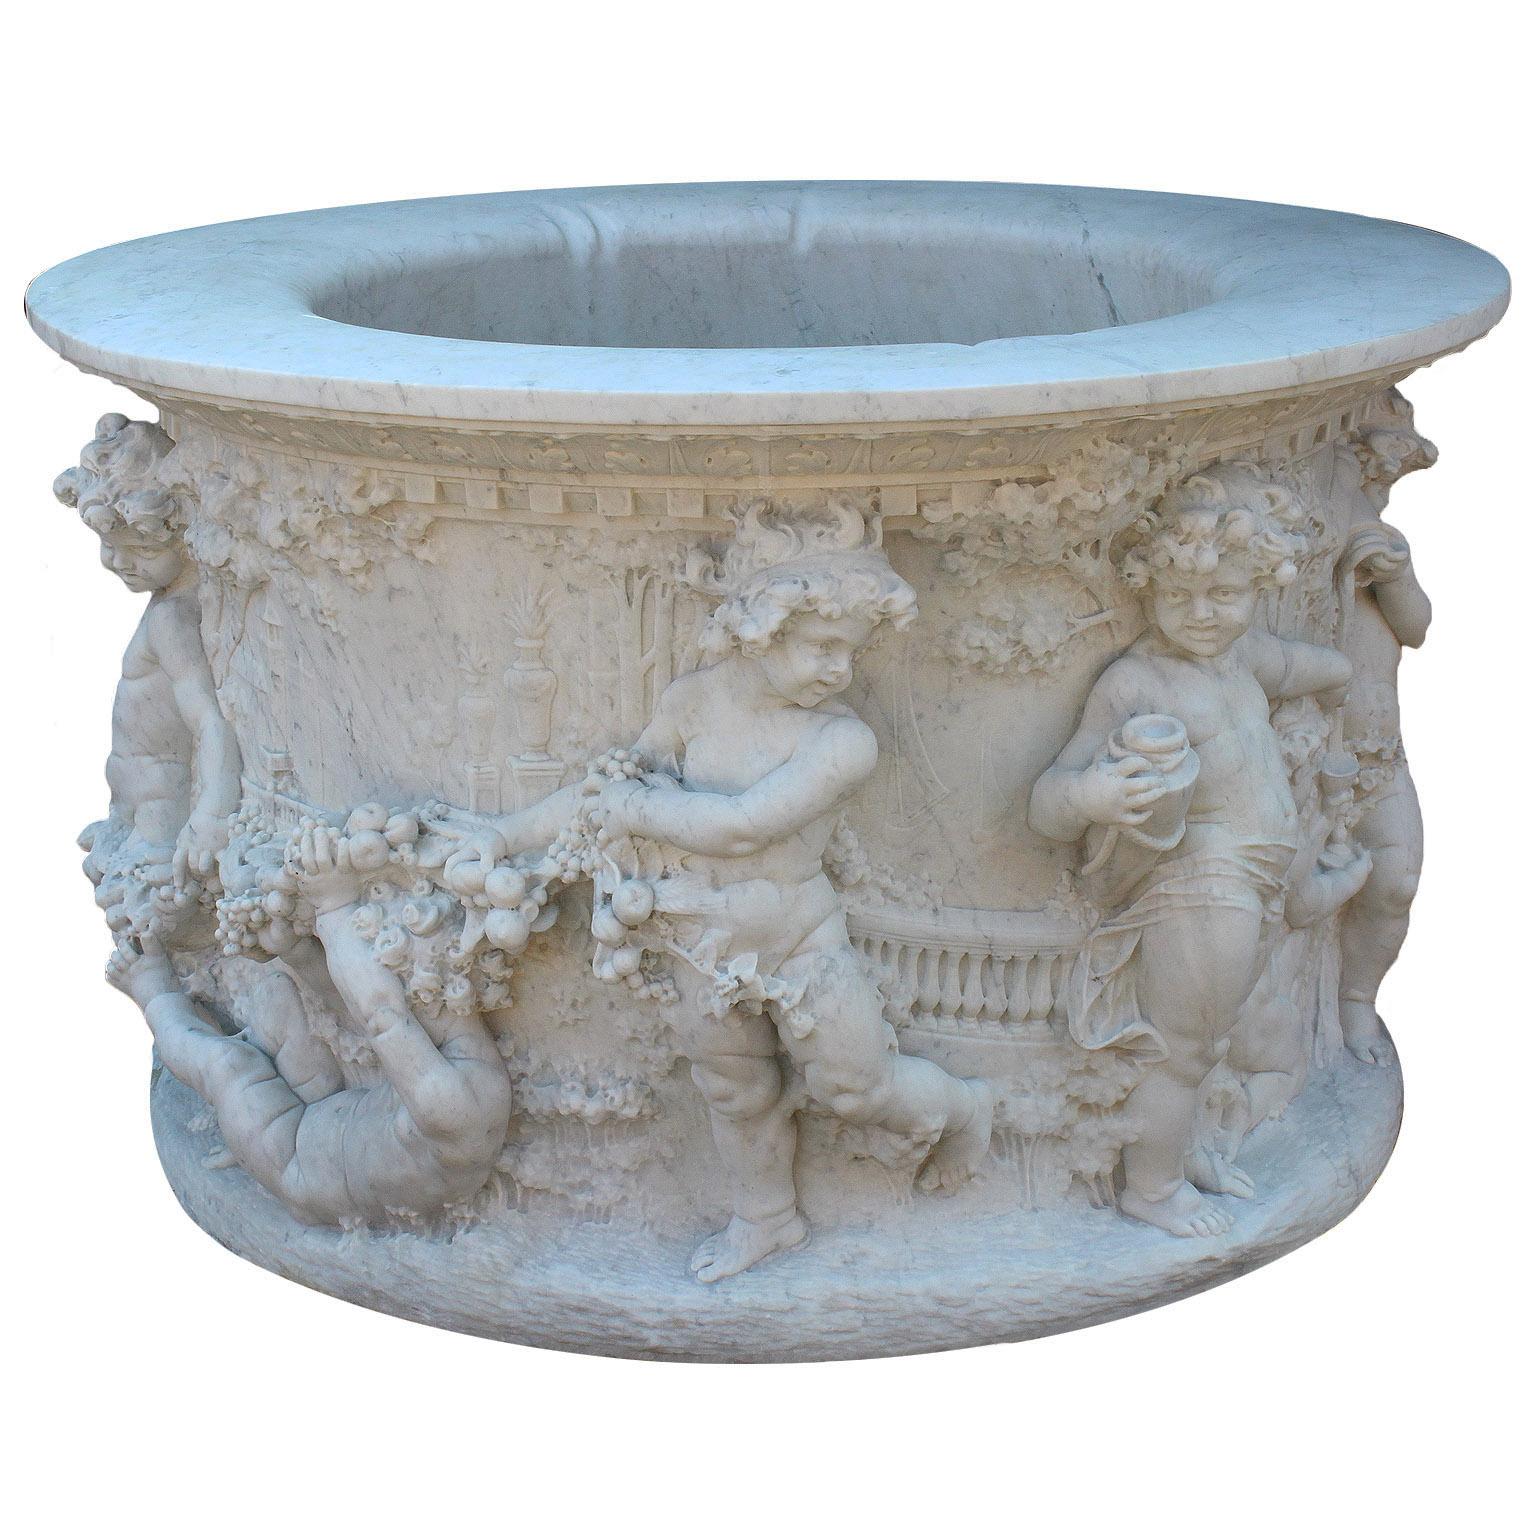 Carrara Marble Italian 19th-20th Century Whimsical White Marble Wishing Wellhead with Children For Sale